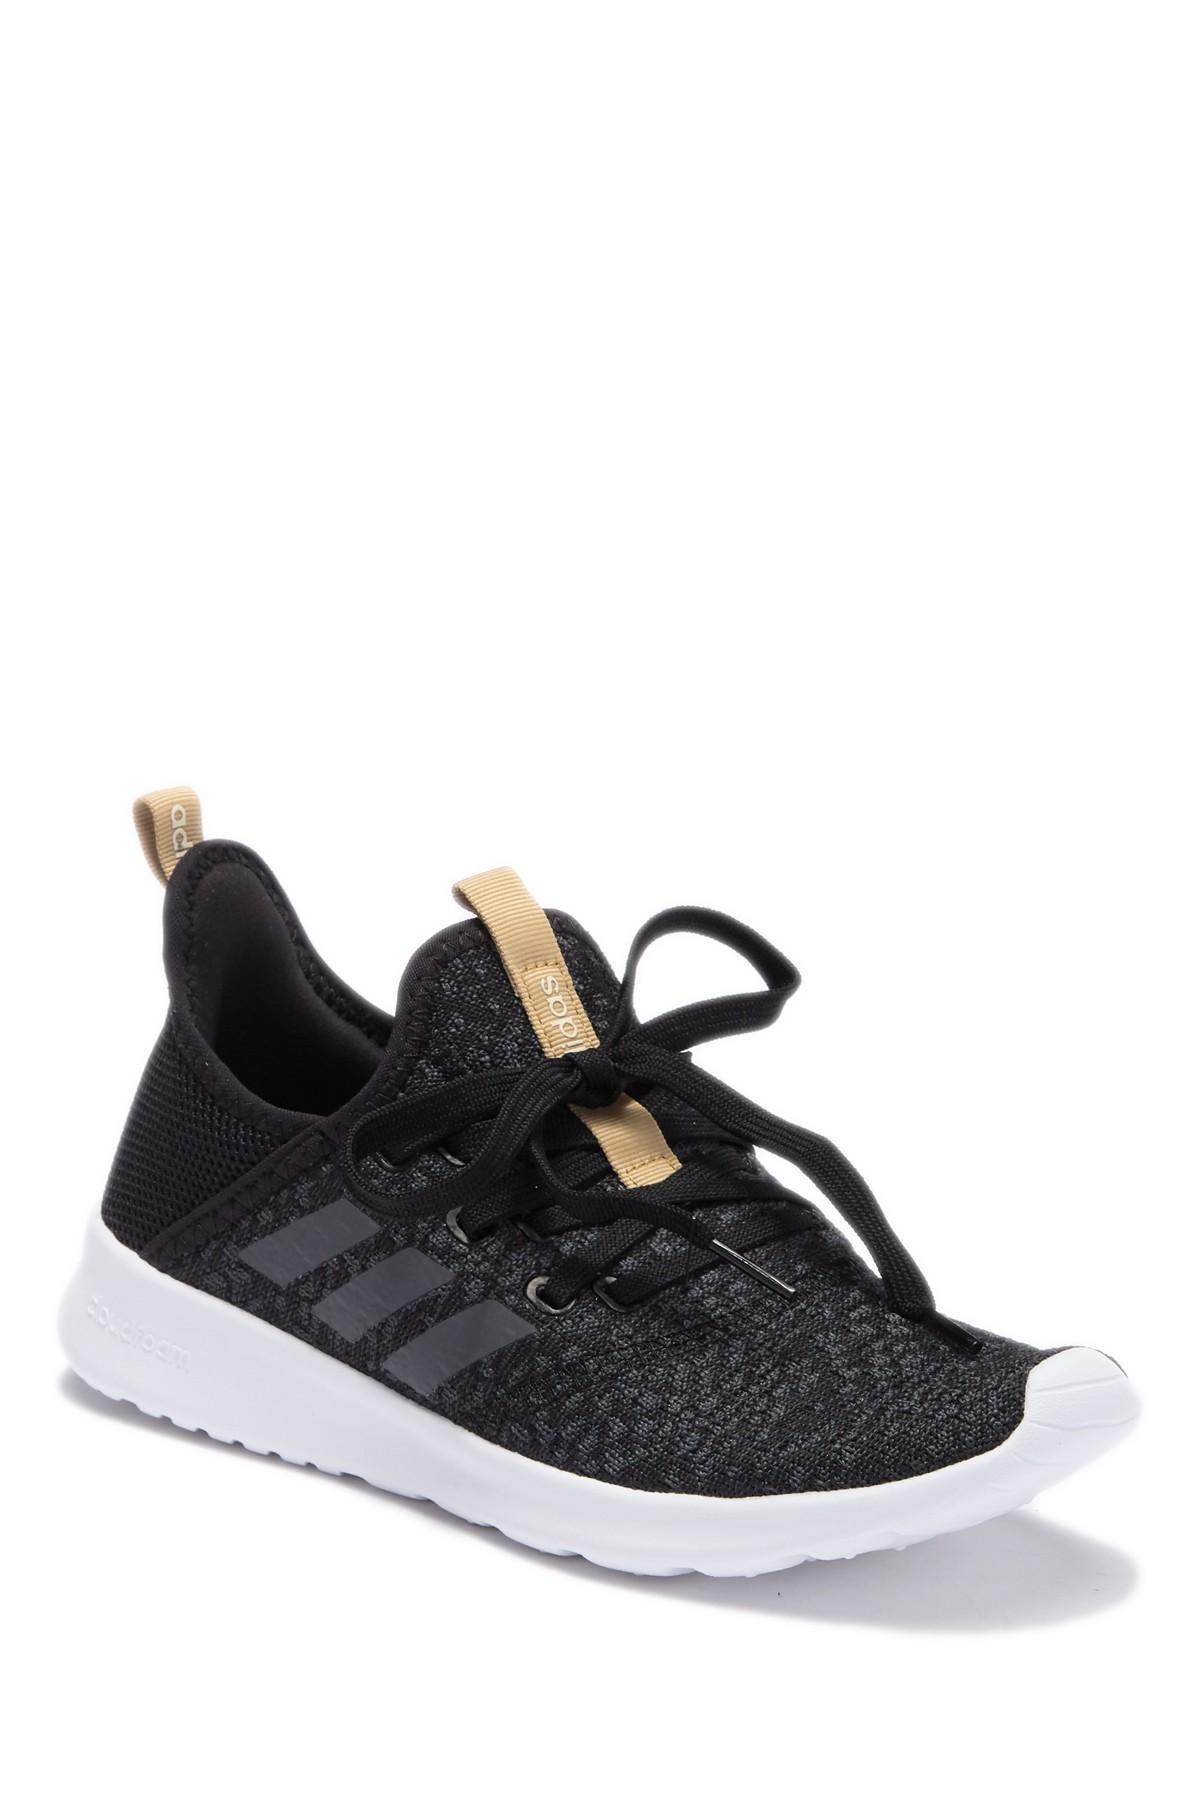 adidas cloudfoam black and gold